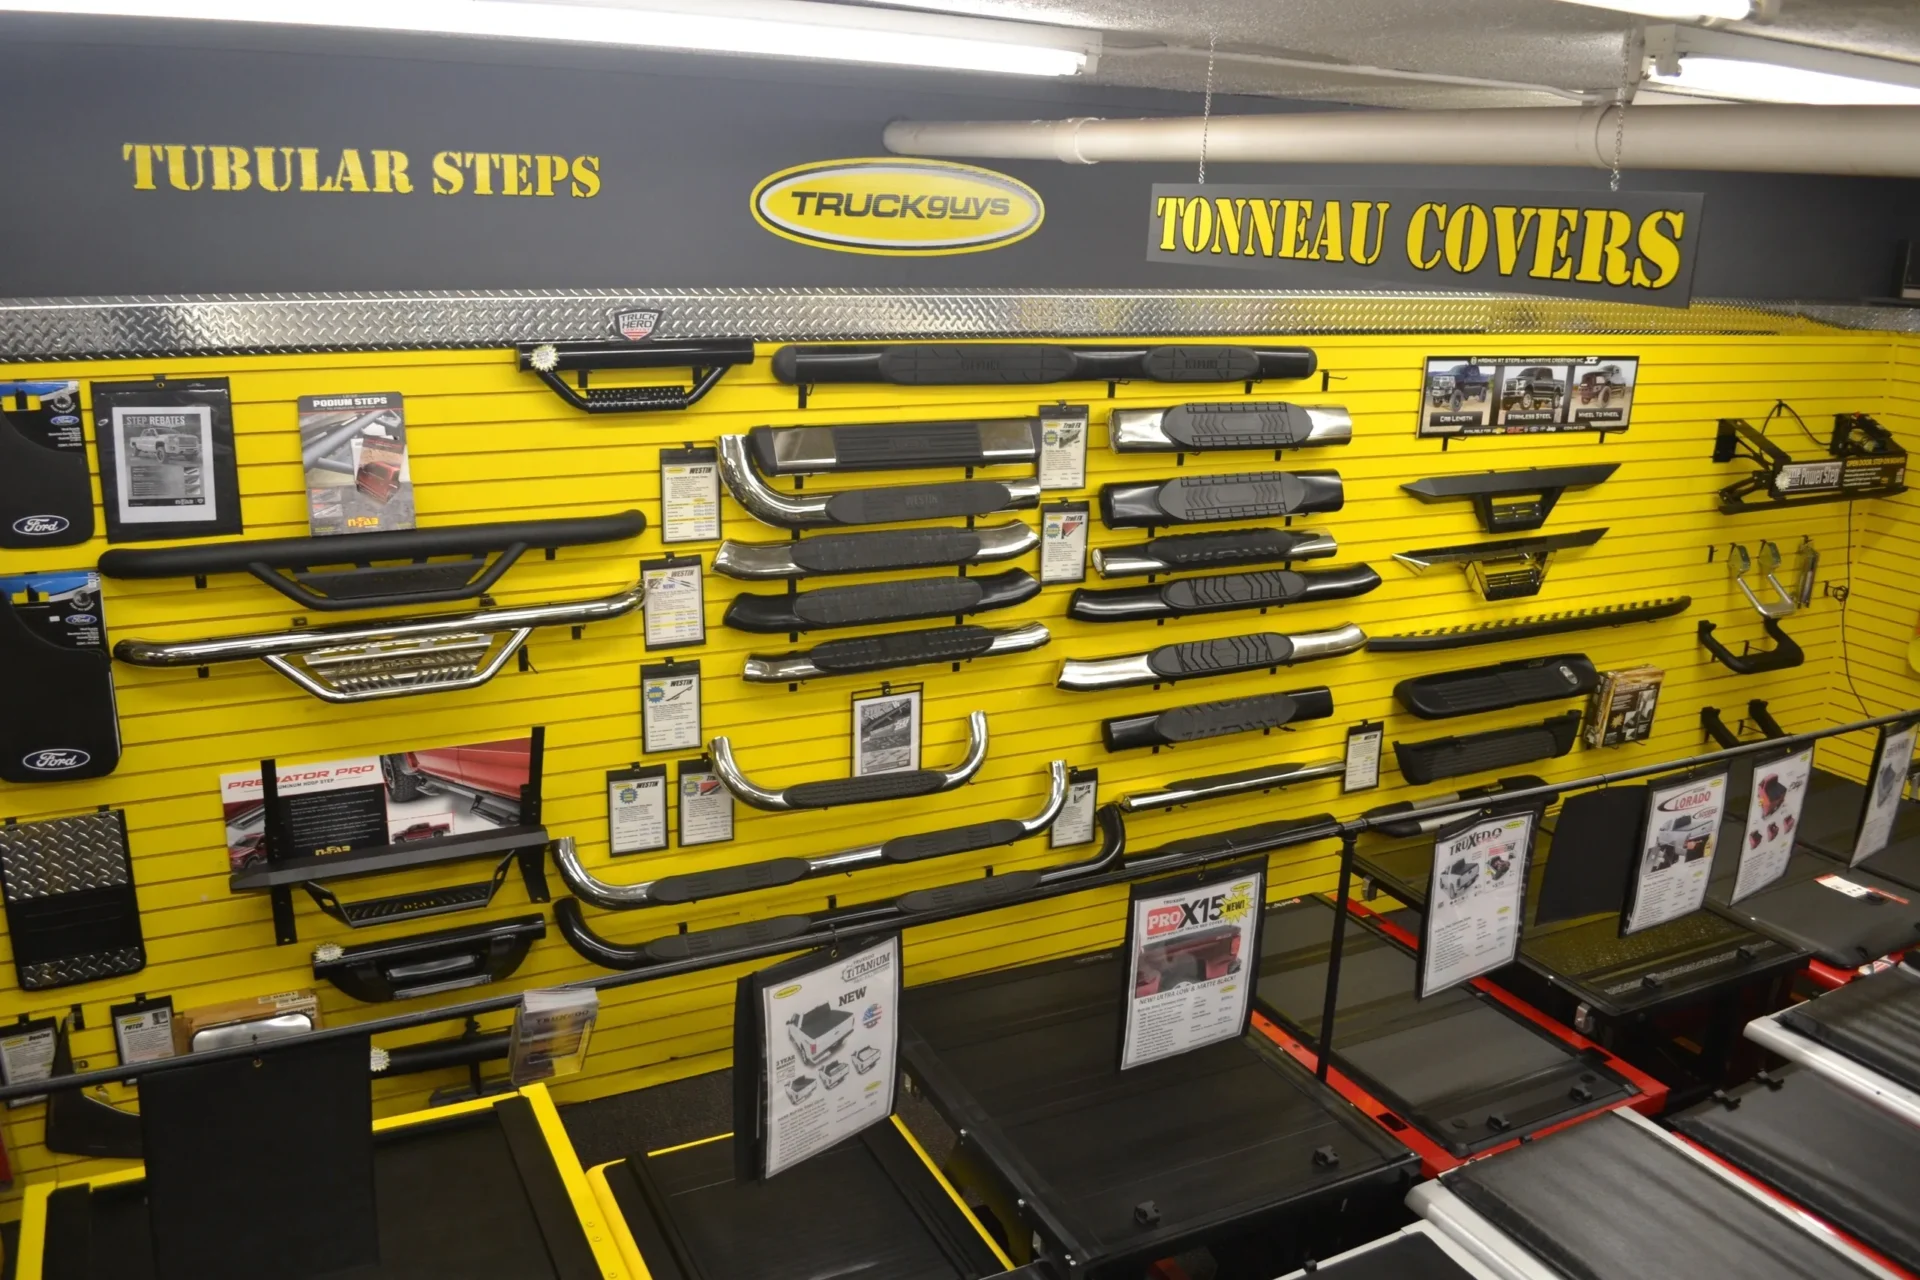 A display of various truck accessories including tubular steps and tonneau covers in a retail setting.